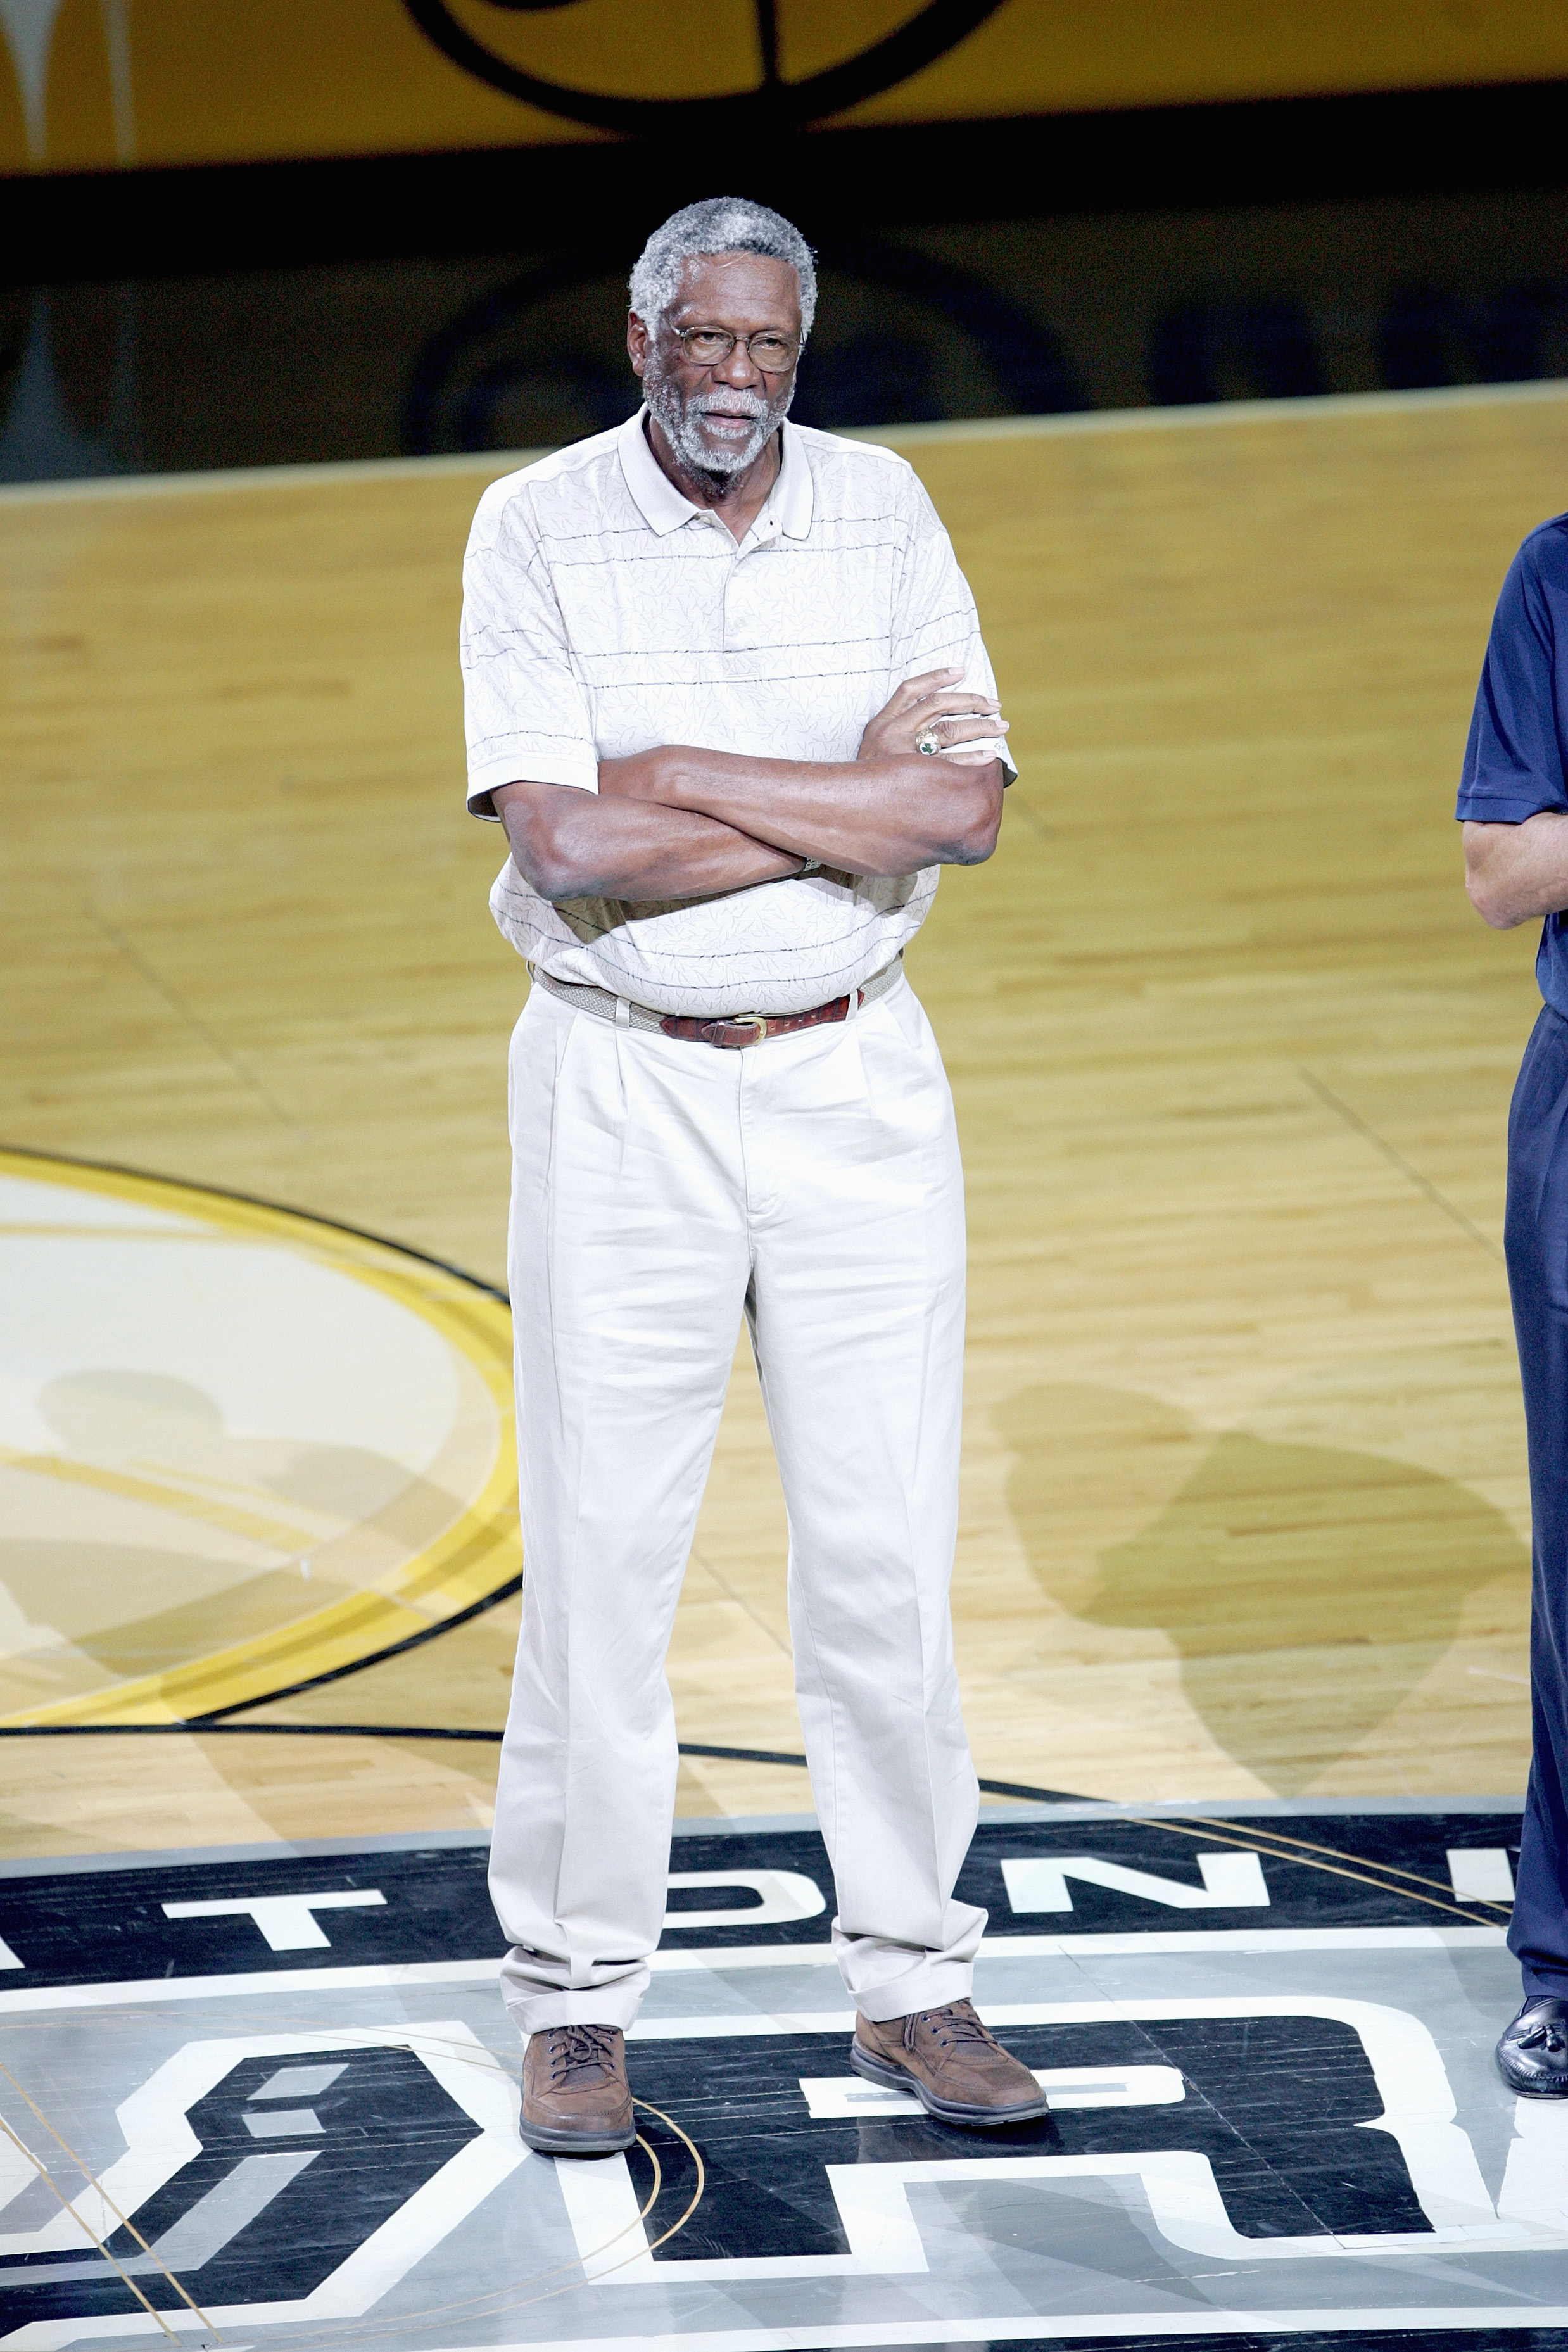 SAN ANTONIO - JUNE 12: NBA legend Bill Russell is introduced to the crowd before Game two of the 2005 NBA Finals between the Detroit Pistons and the San Antonio Spurs at SBC Center on June 12, 2005 in San Antonio, Texas.  NOTE TO USER: User expressly ackn